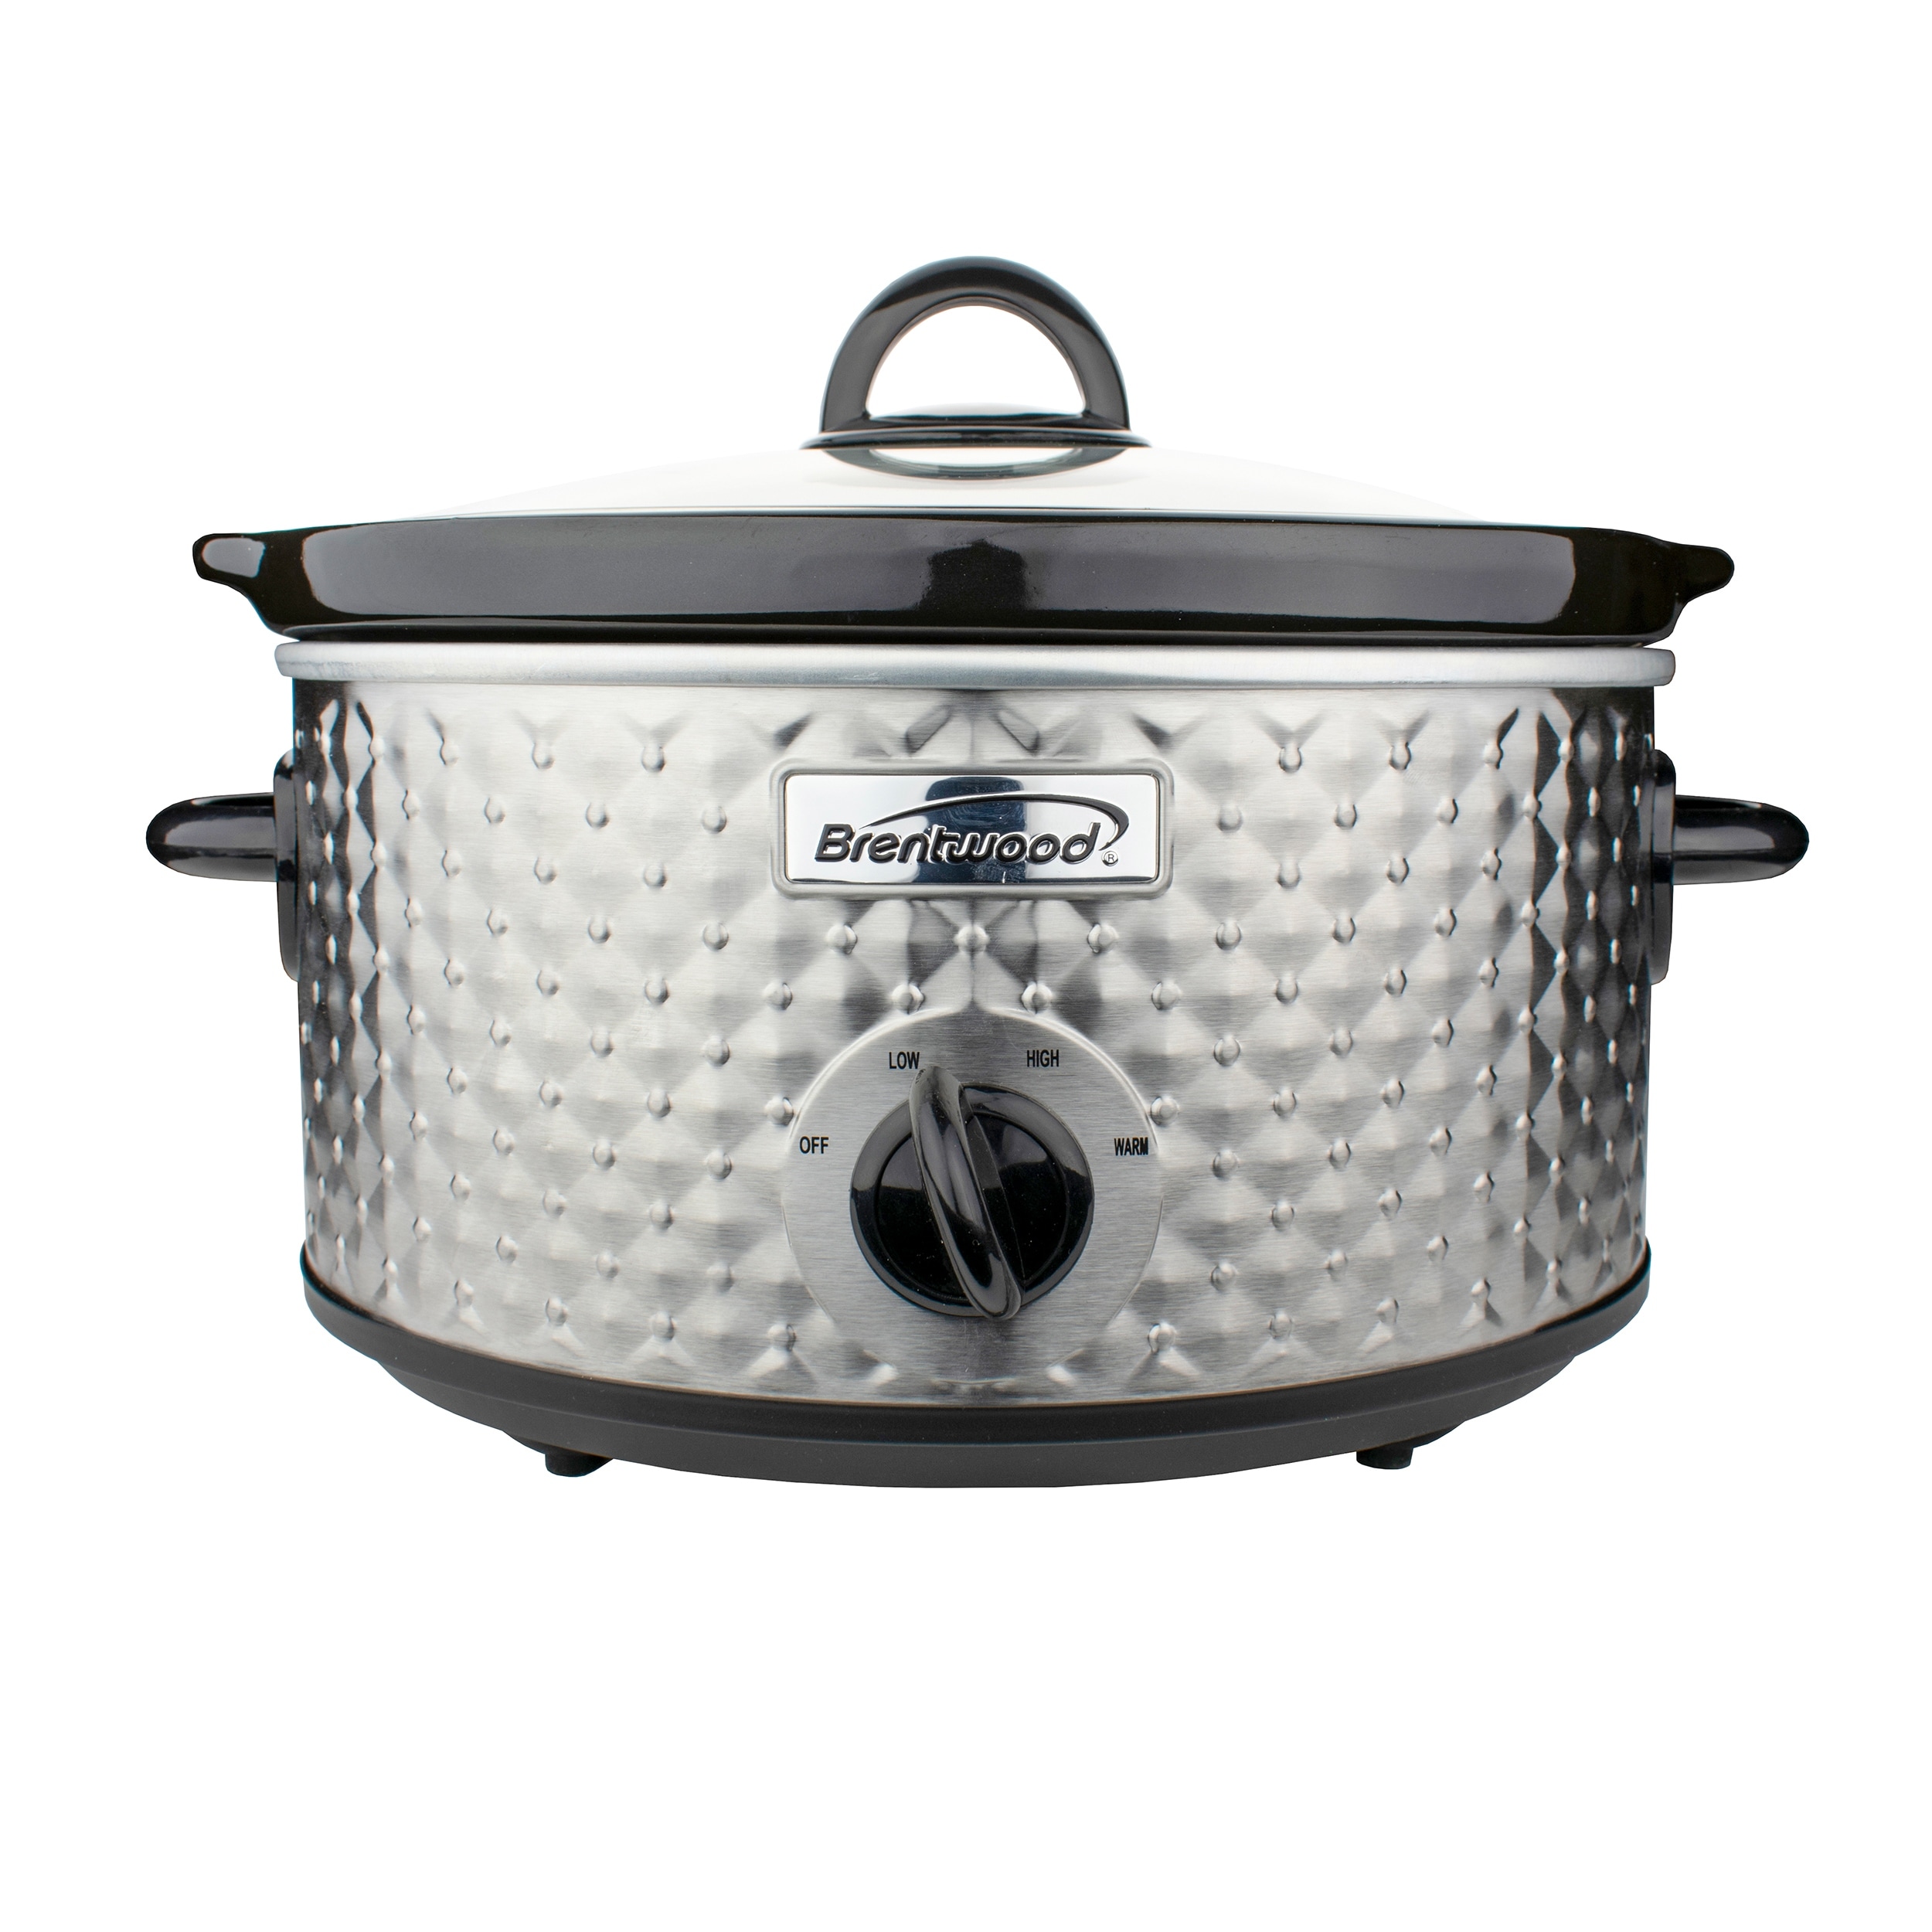 https://ak1.ostkcdn.com/images/products/is/images/direct/268dc046727fe05a12b2cfde1ce4b911f032d4b2/Brentwood-3.5-Quart-Diamond-Pattern-Slow-Cooker-in-Stainless-Steel.jpg